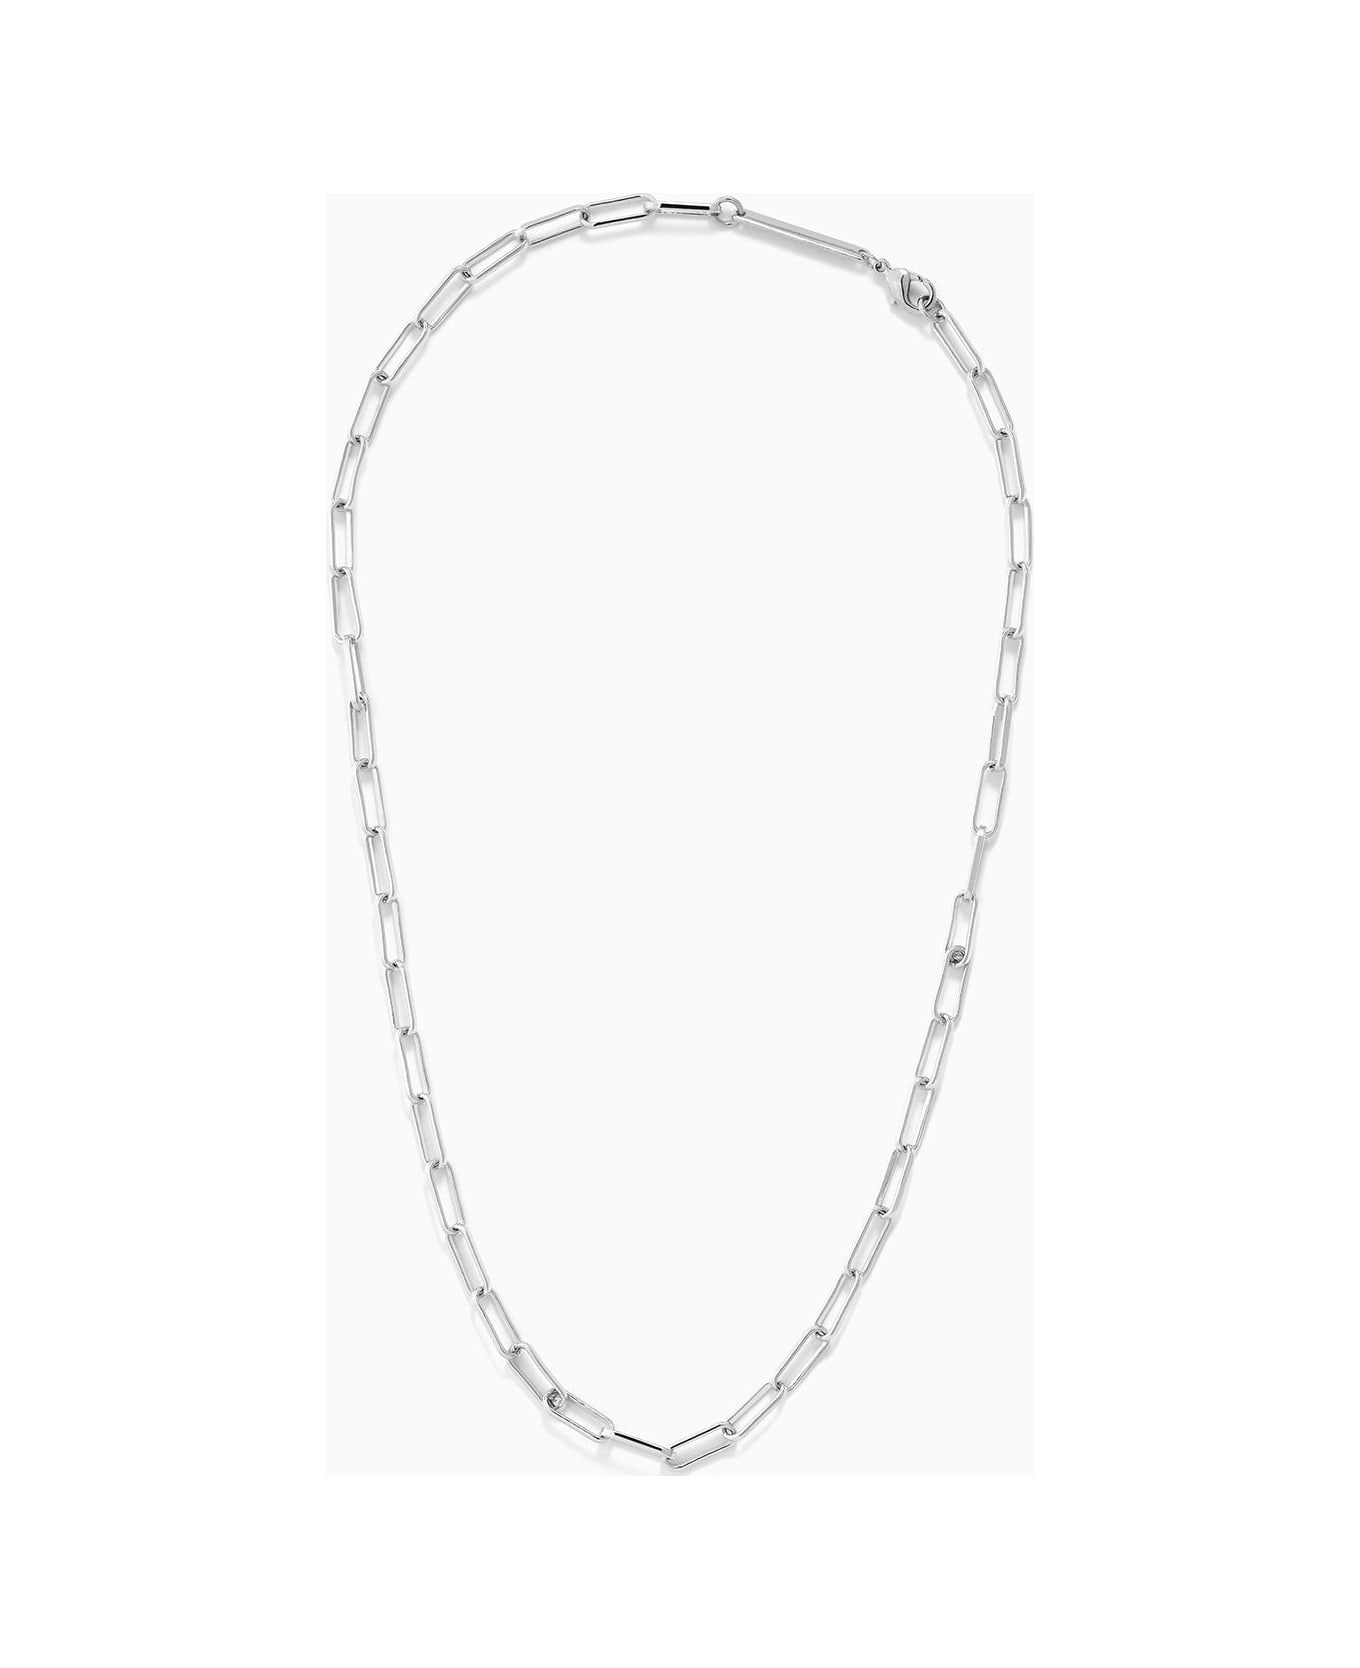 Federica Tosi Lace Karen Silver - SILVER ネックレス